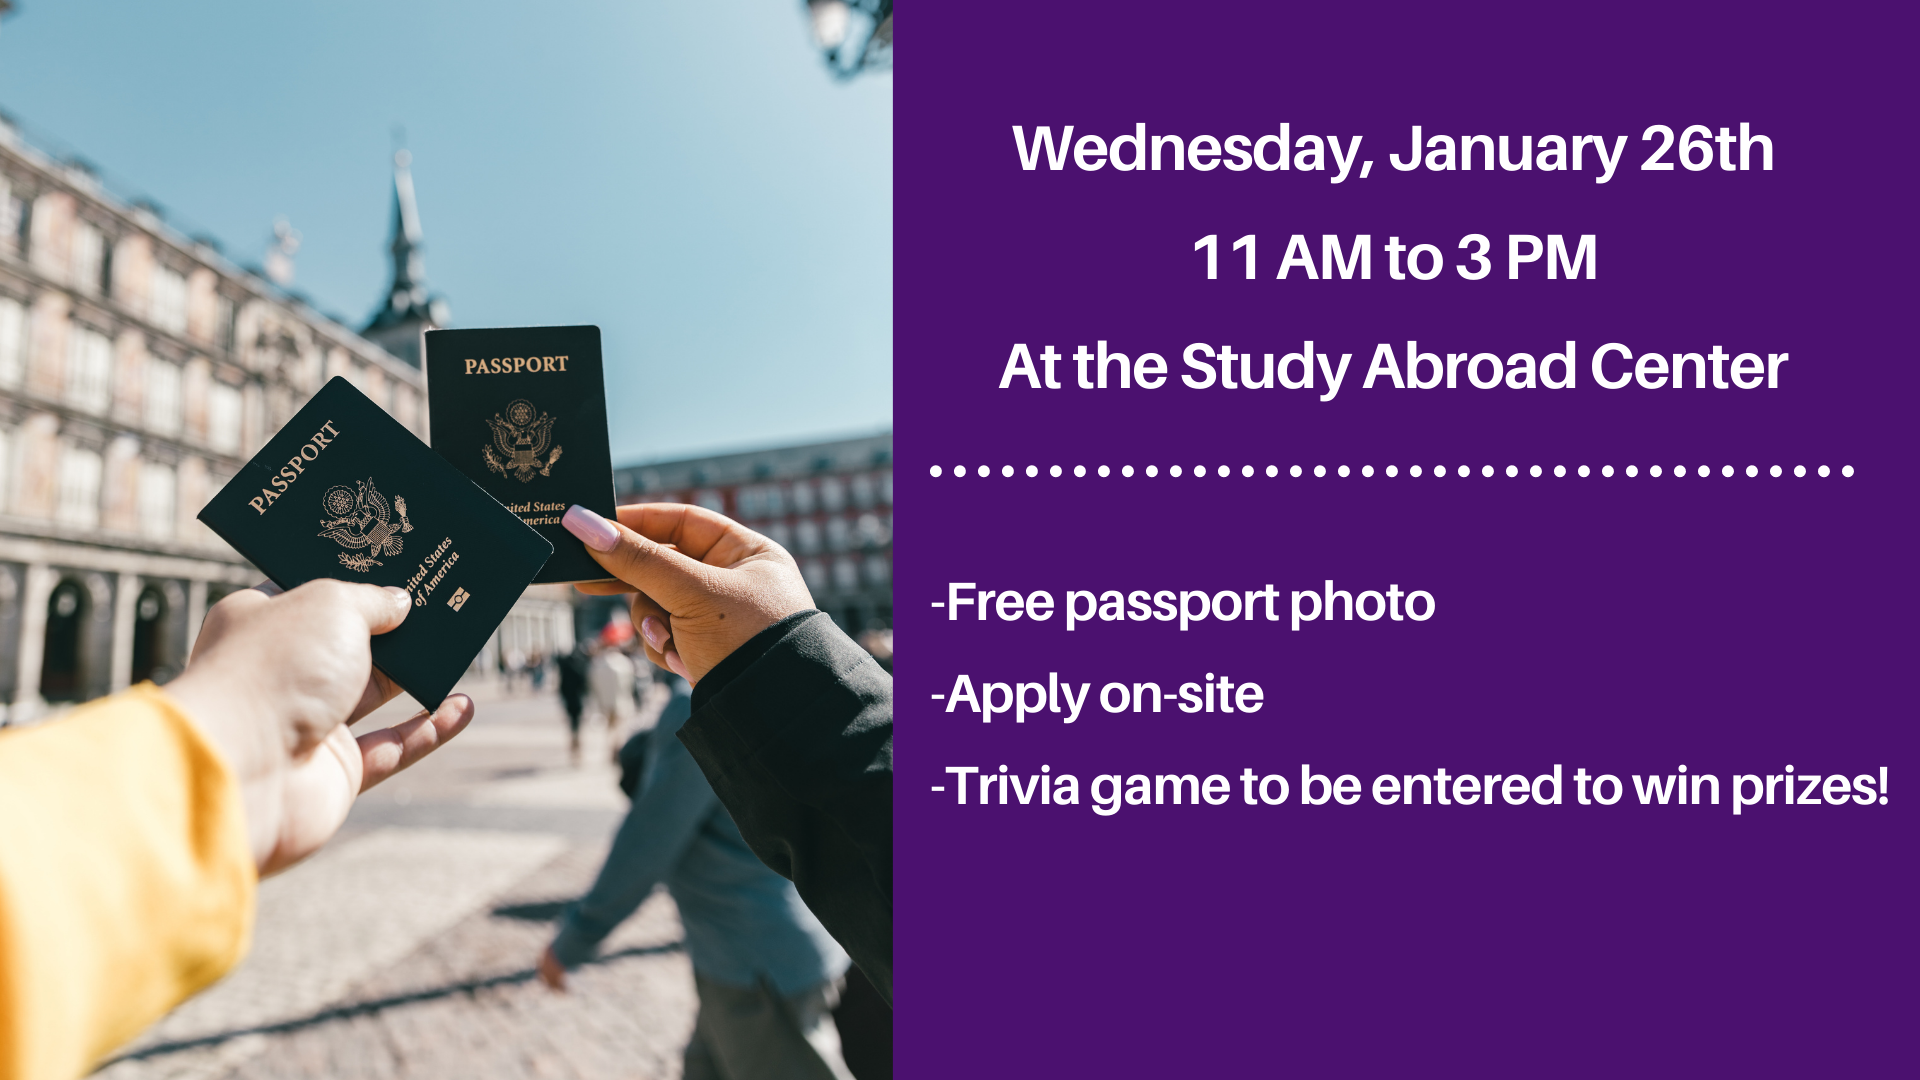 -Free passport photo -Apply on-site -Trivia game to be entered to win prizes!